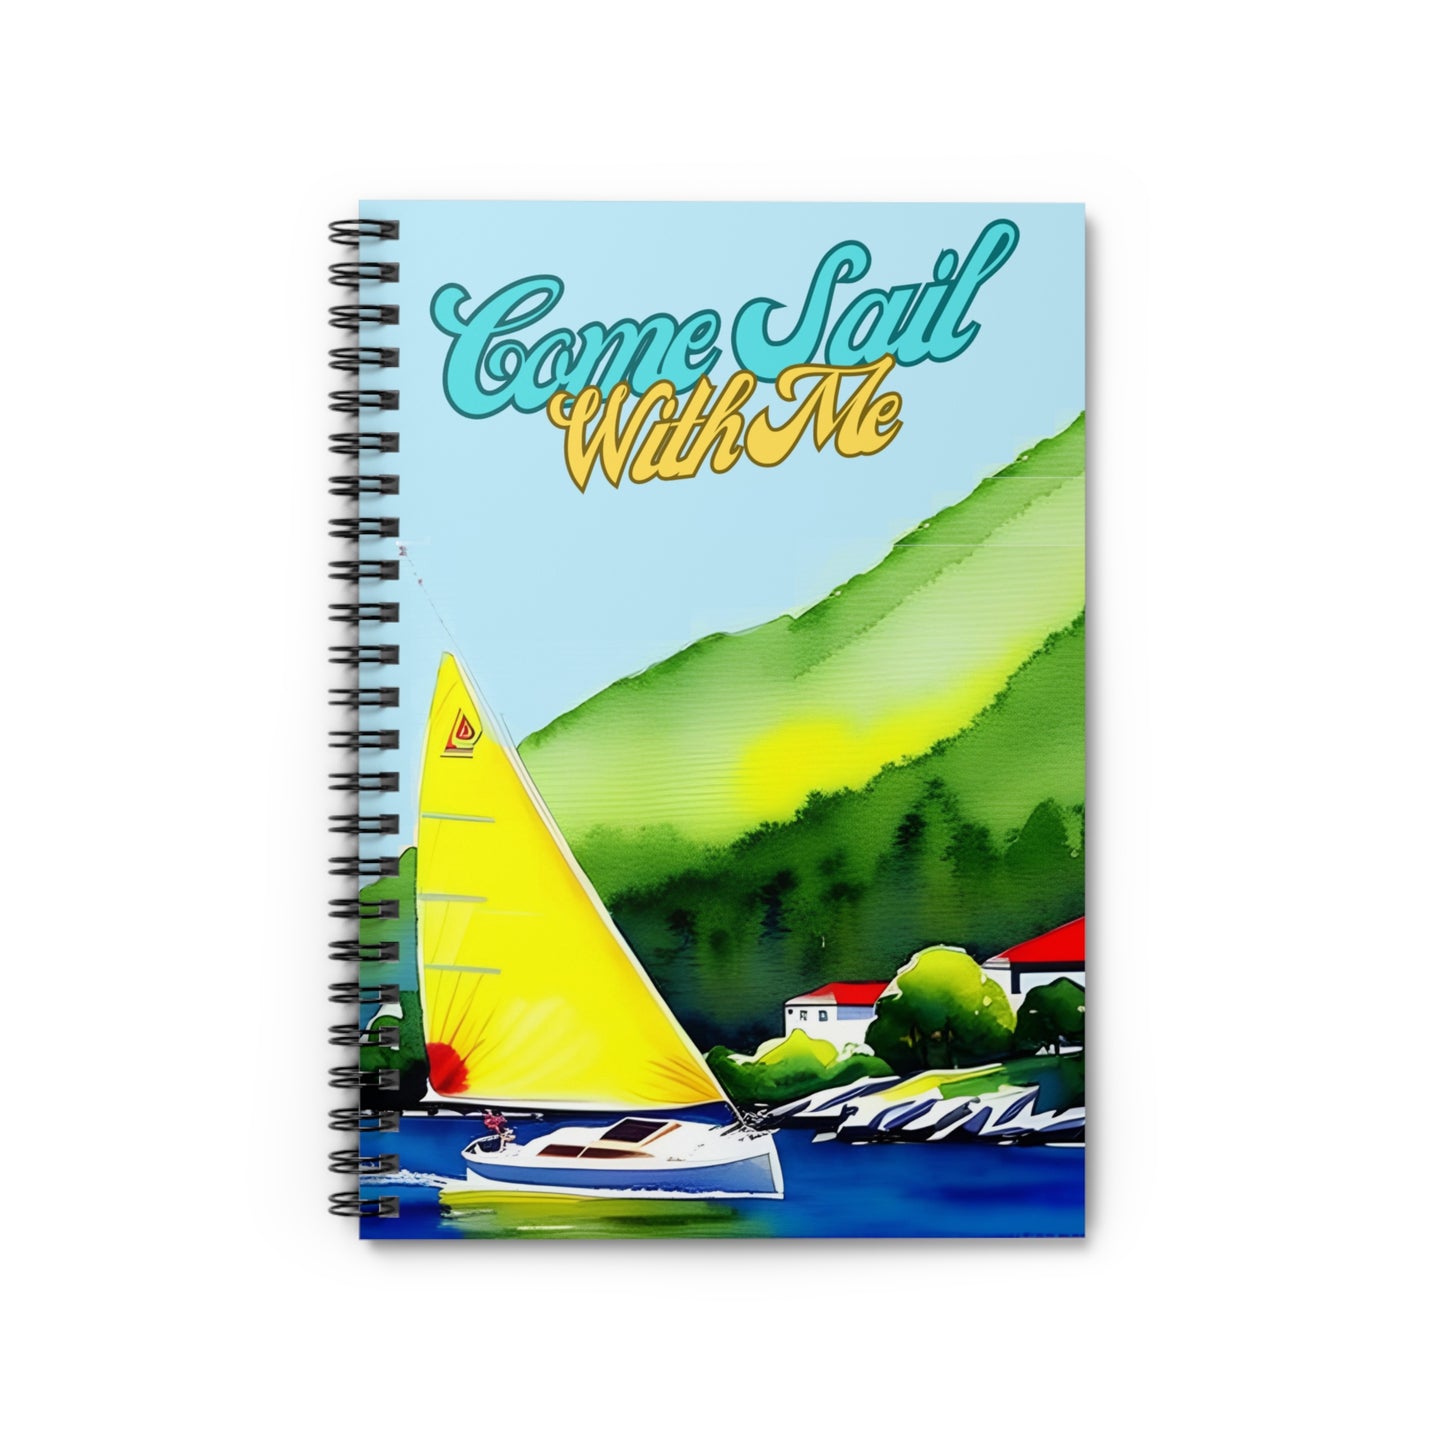 Come Sail With Me - Spiral Notebook - Ruled Line